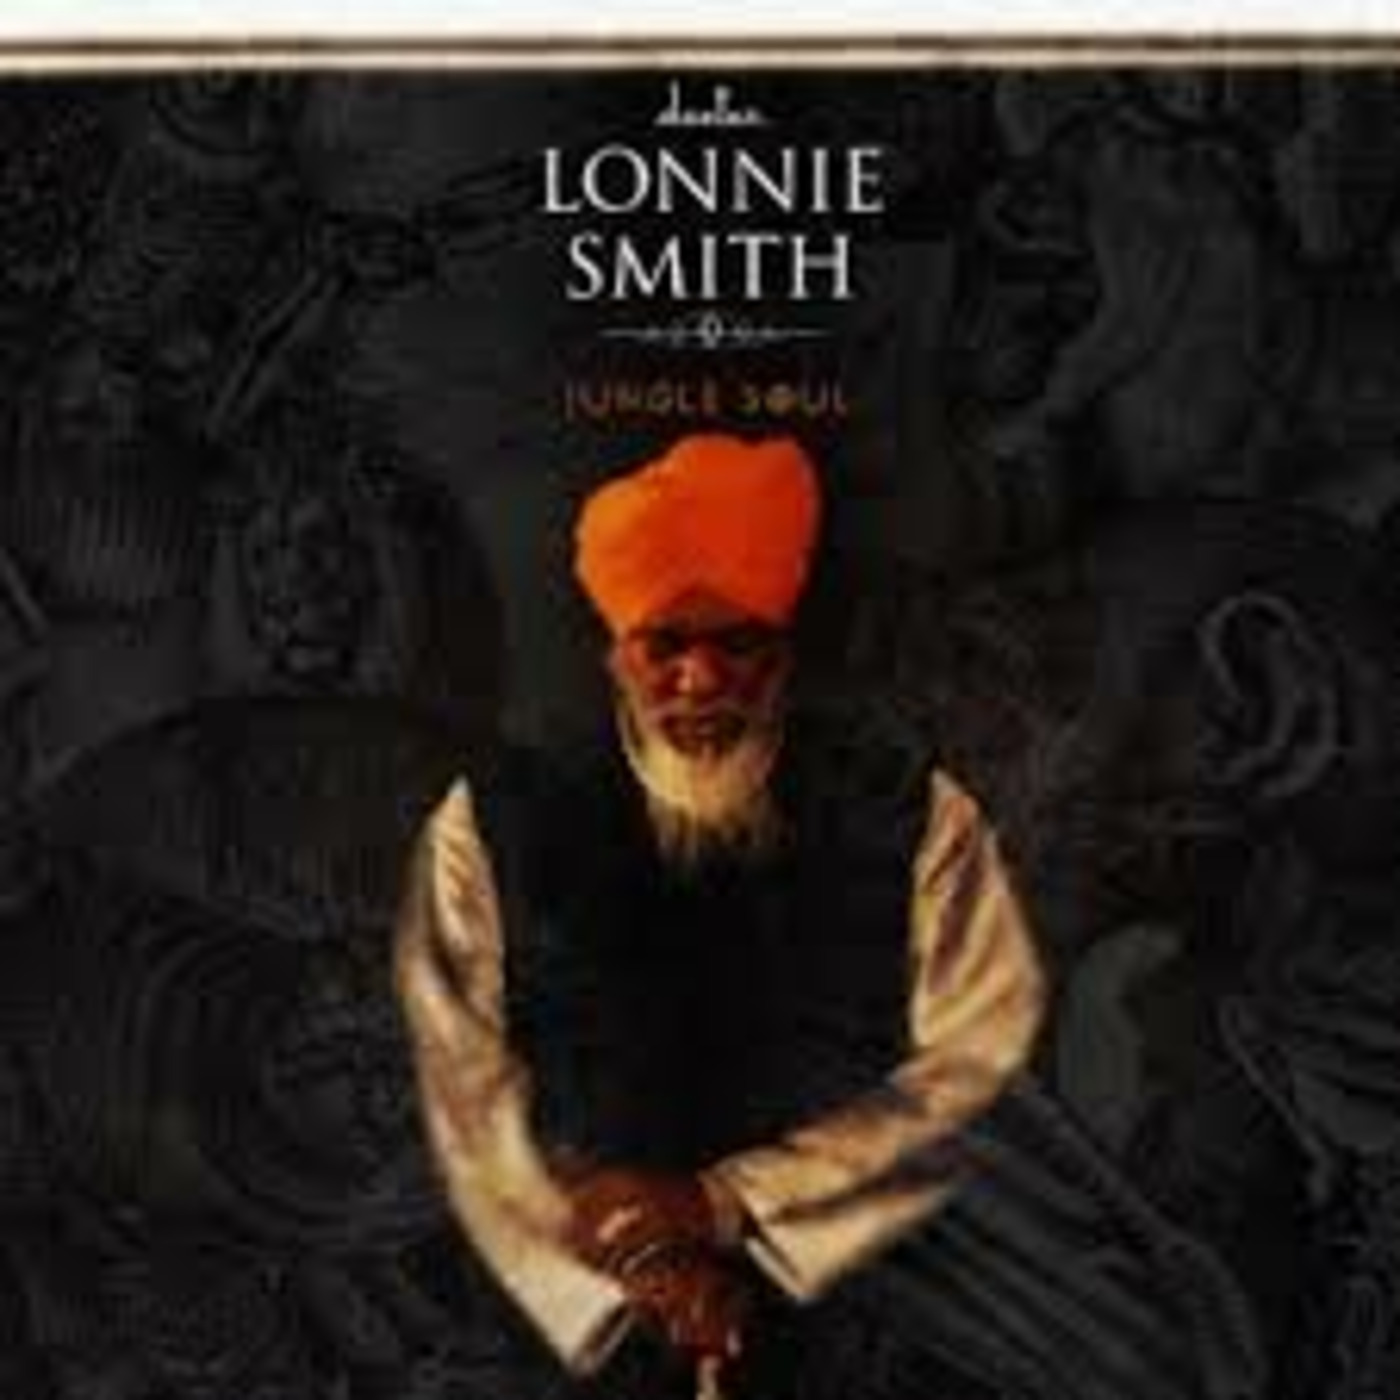 Episode 59: Koal Bee 443 -Sneakers54 Collection (21-11-21) Sneakers Tribute to Dr Lonnie Smith - The Funky Sikh